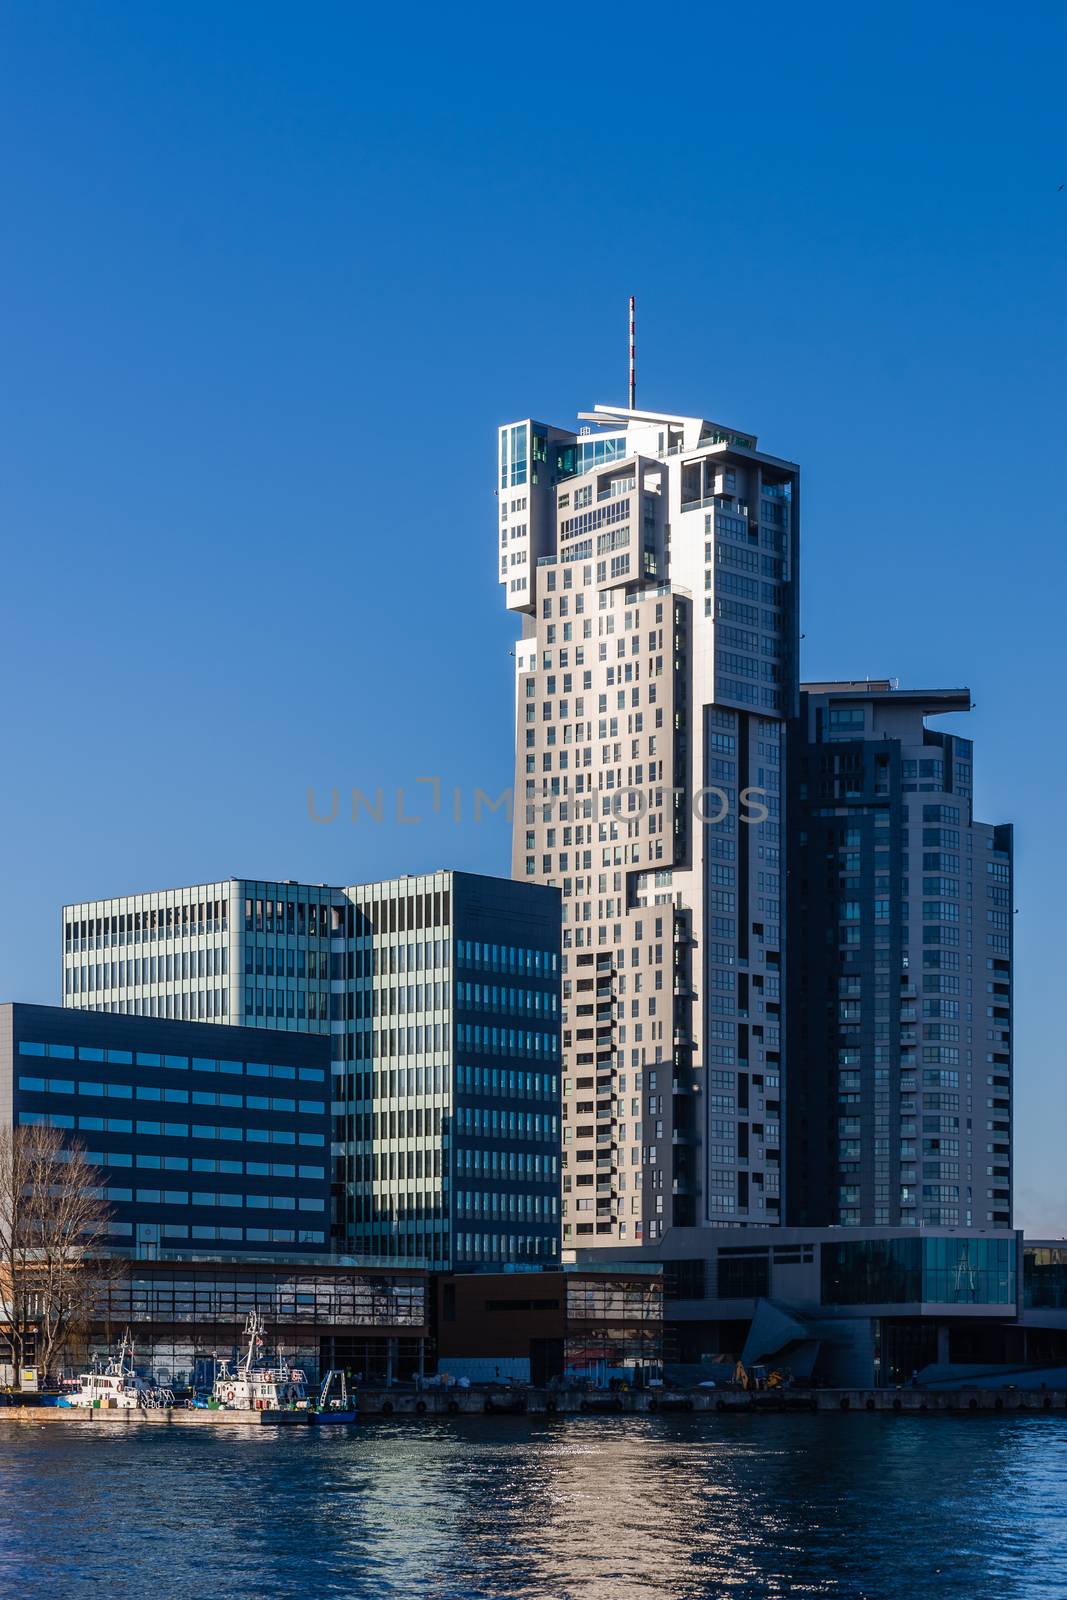 The Sea Towers, multi-use skyscraper. Built in 2009 building is the 10th tallest building in Poland and the second tallest residential building in the country.